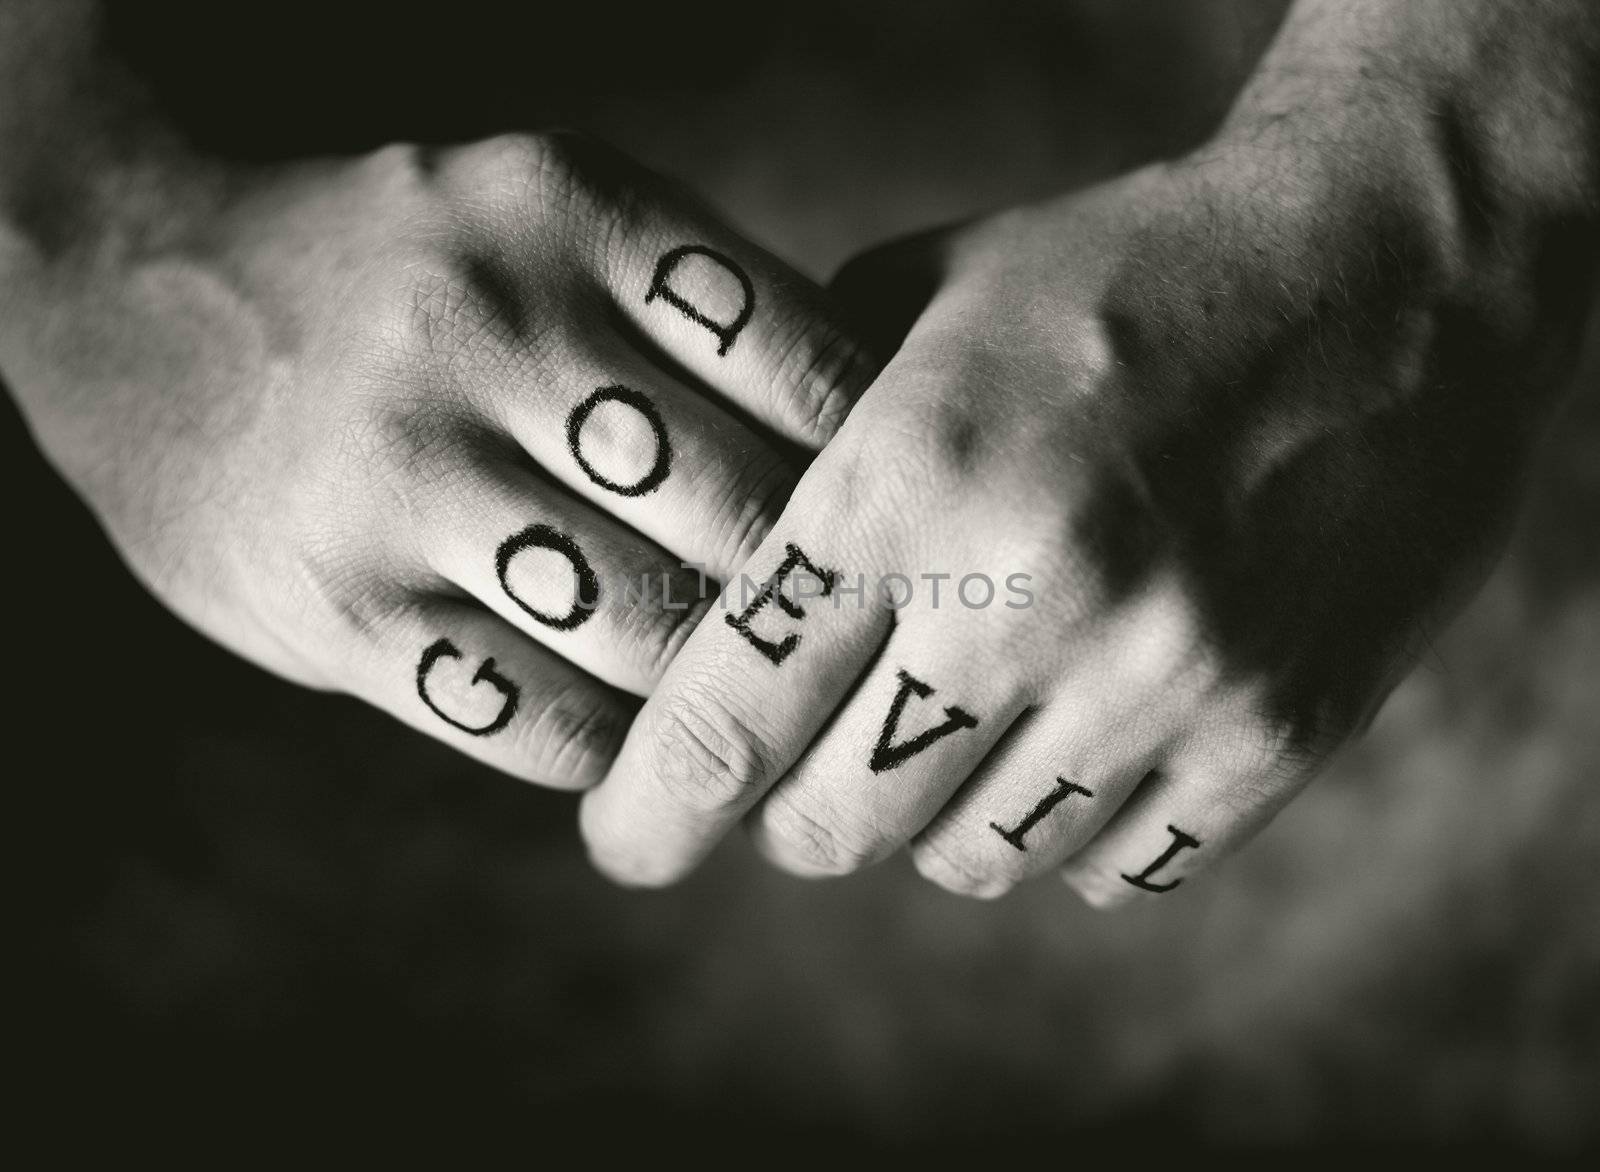 Man with "Good" and "Evil" (fake) tattoos on his fingers.